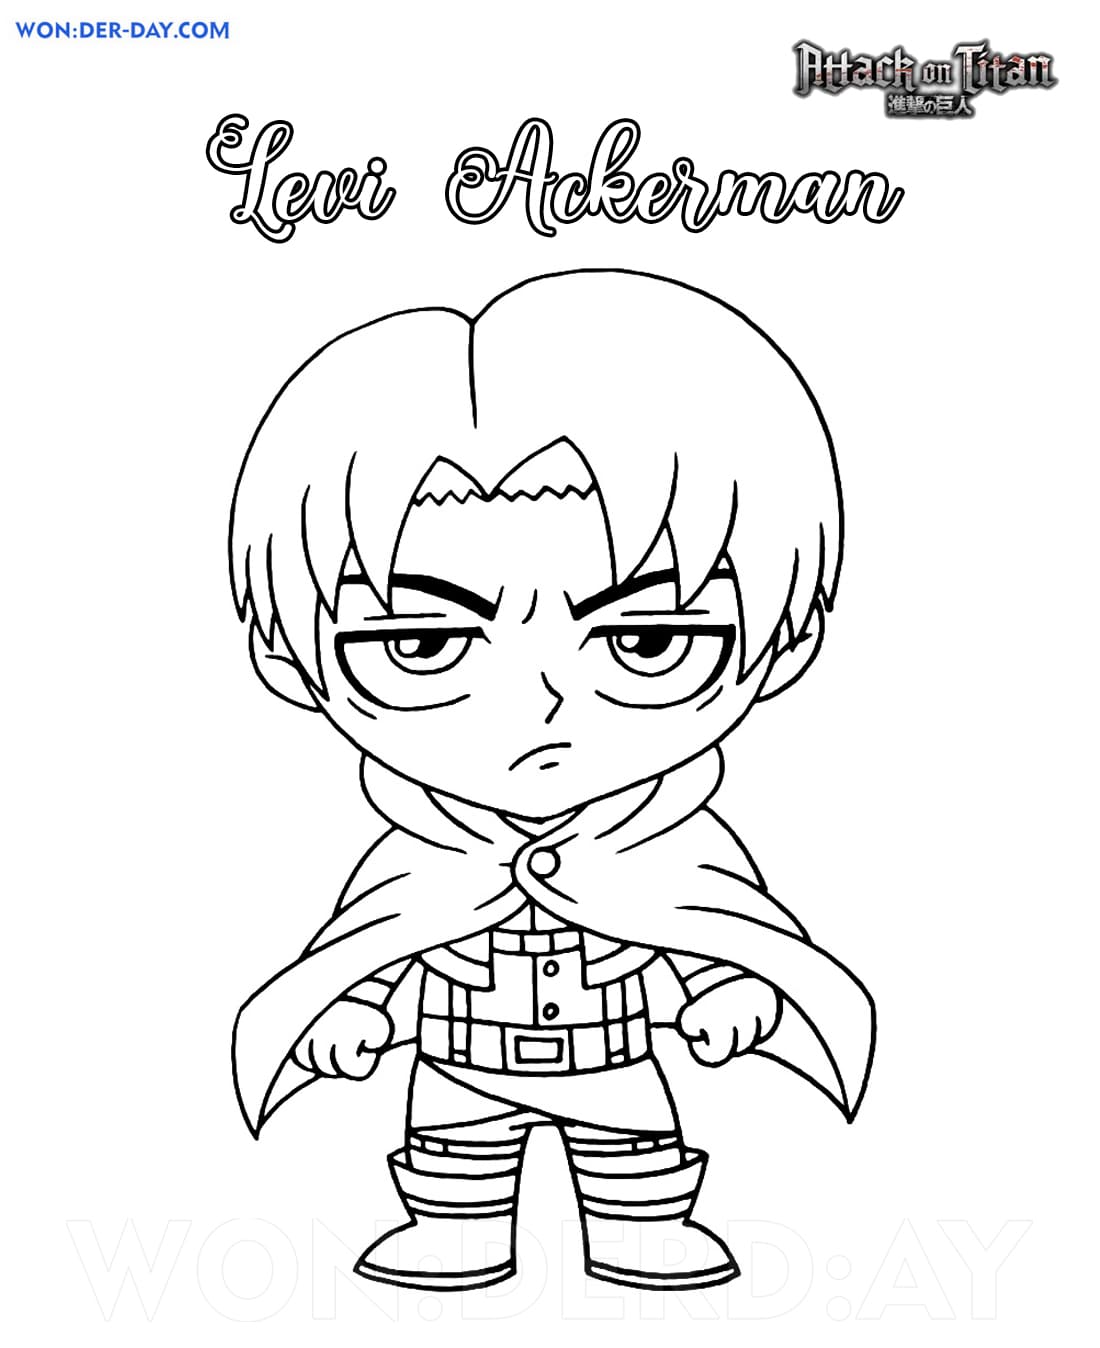 Attack on Titan coloring pages   Free printable coloring pages